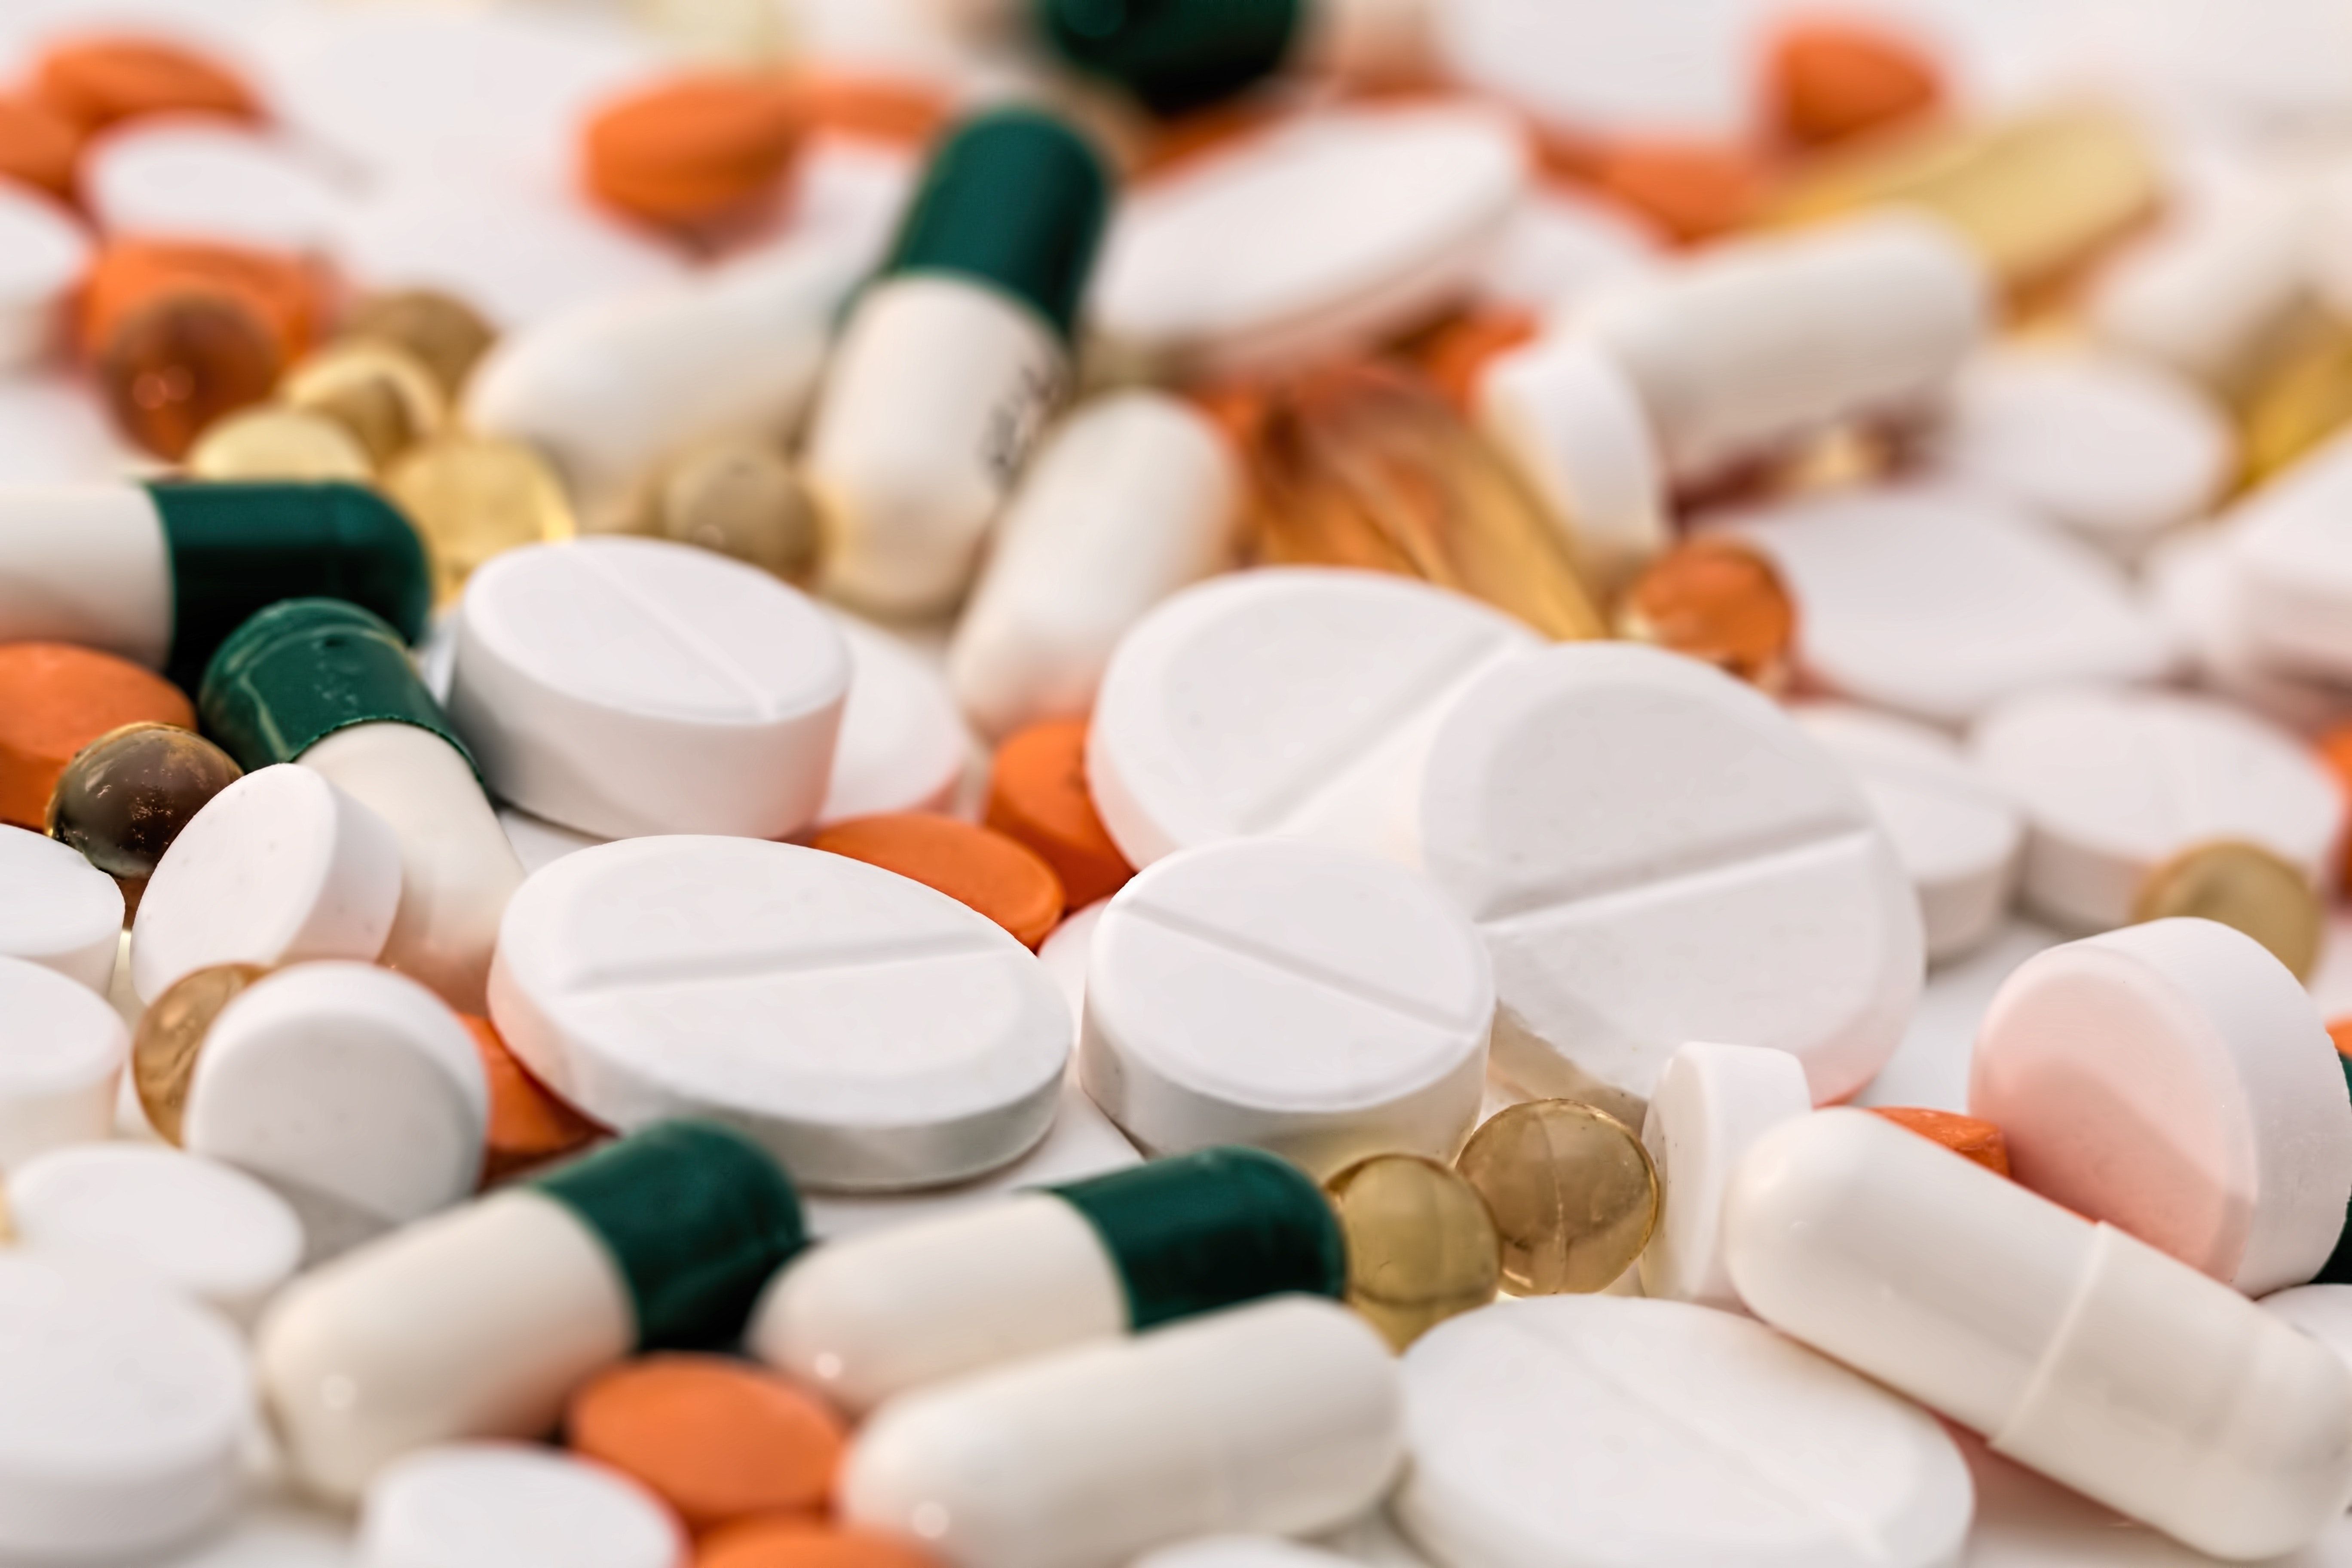 Proton Pump Inhibitors Associated With Increased Risk of Drug-Resistant Infections